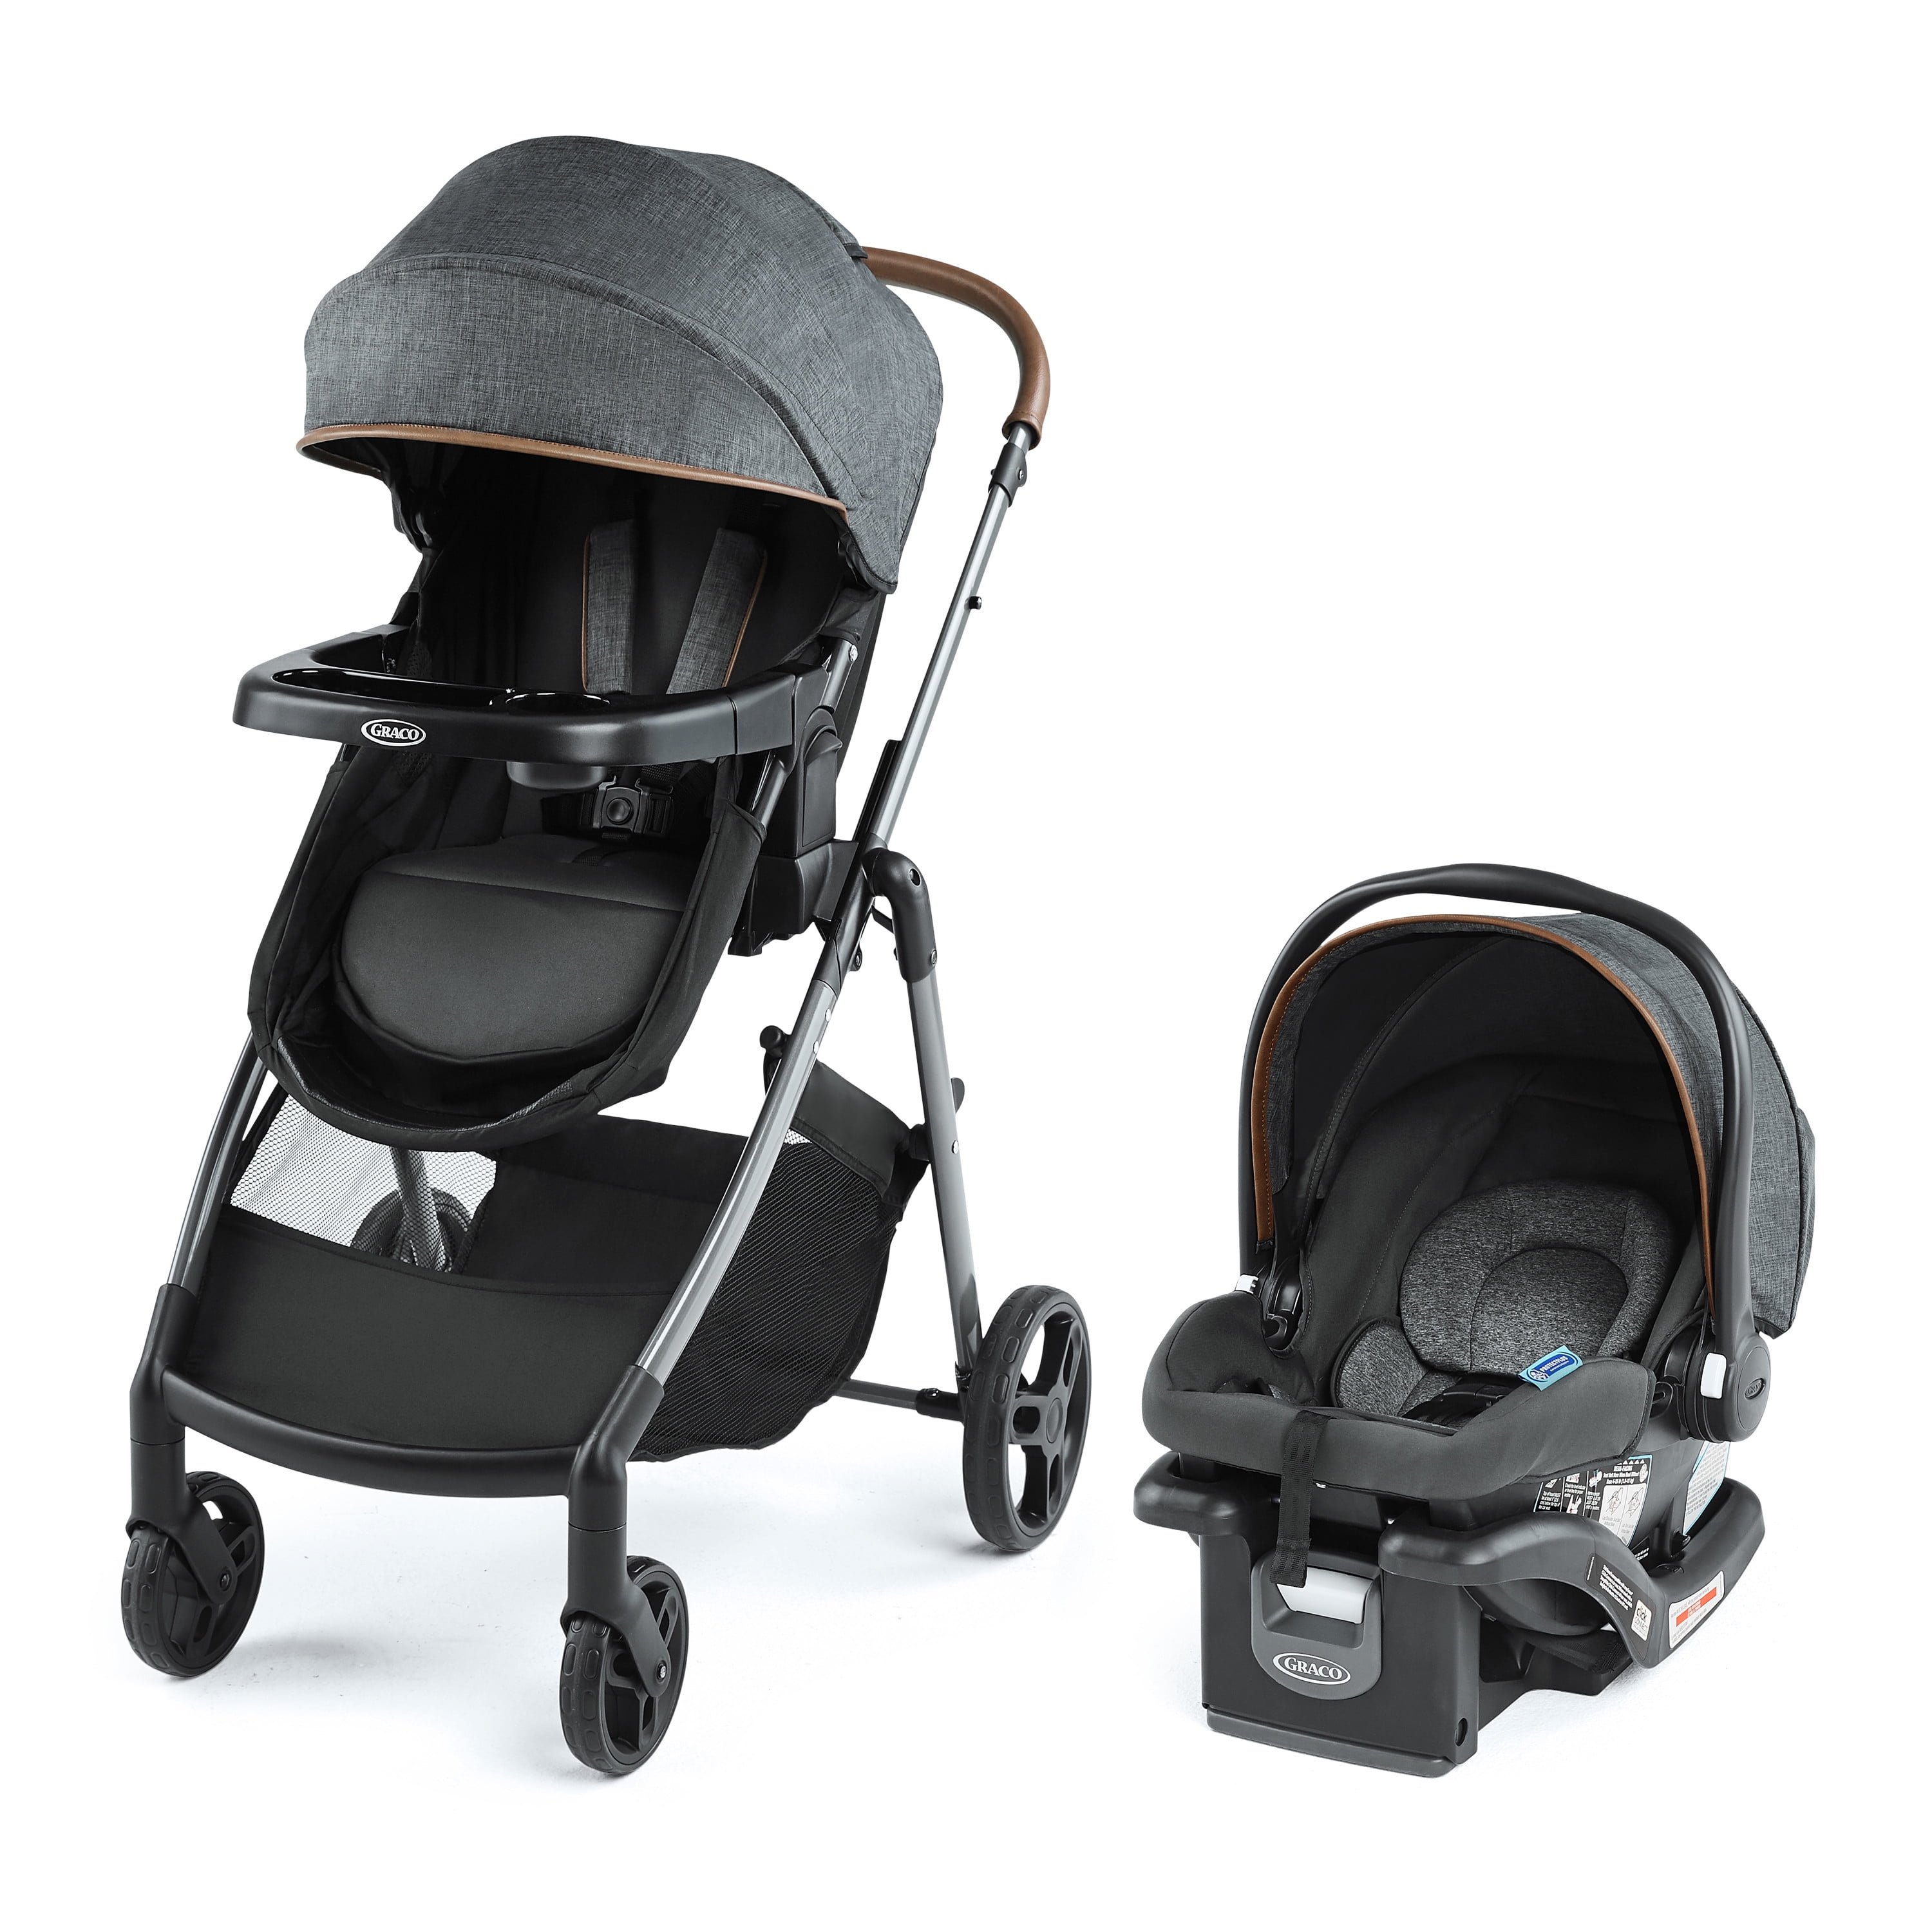 Graco receives a trio of accolades from ADAC - Nursery Today